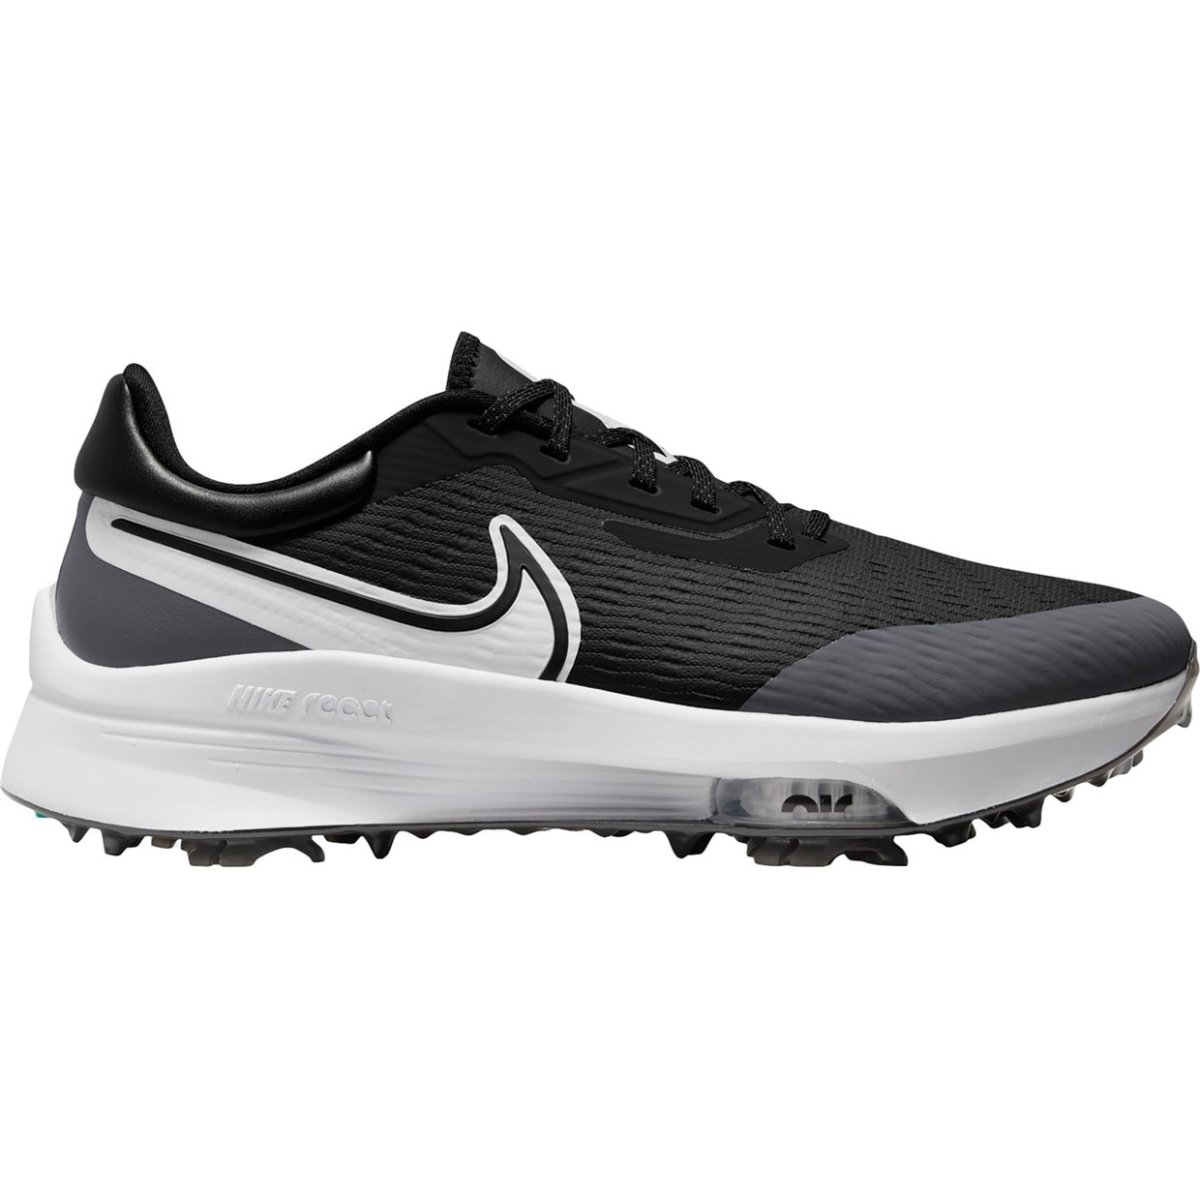 Shop the latest Nike golf shoes - like the Air Zoom Infinity NXT% - on Morning Read's pro shop.